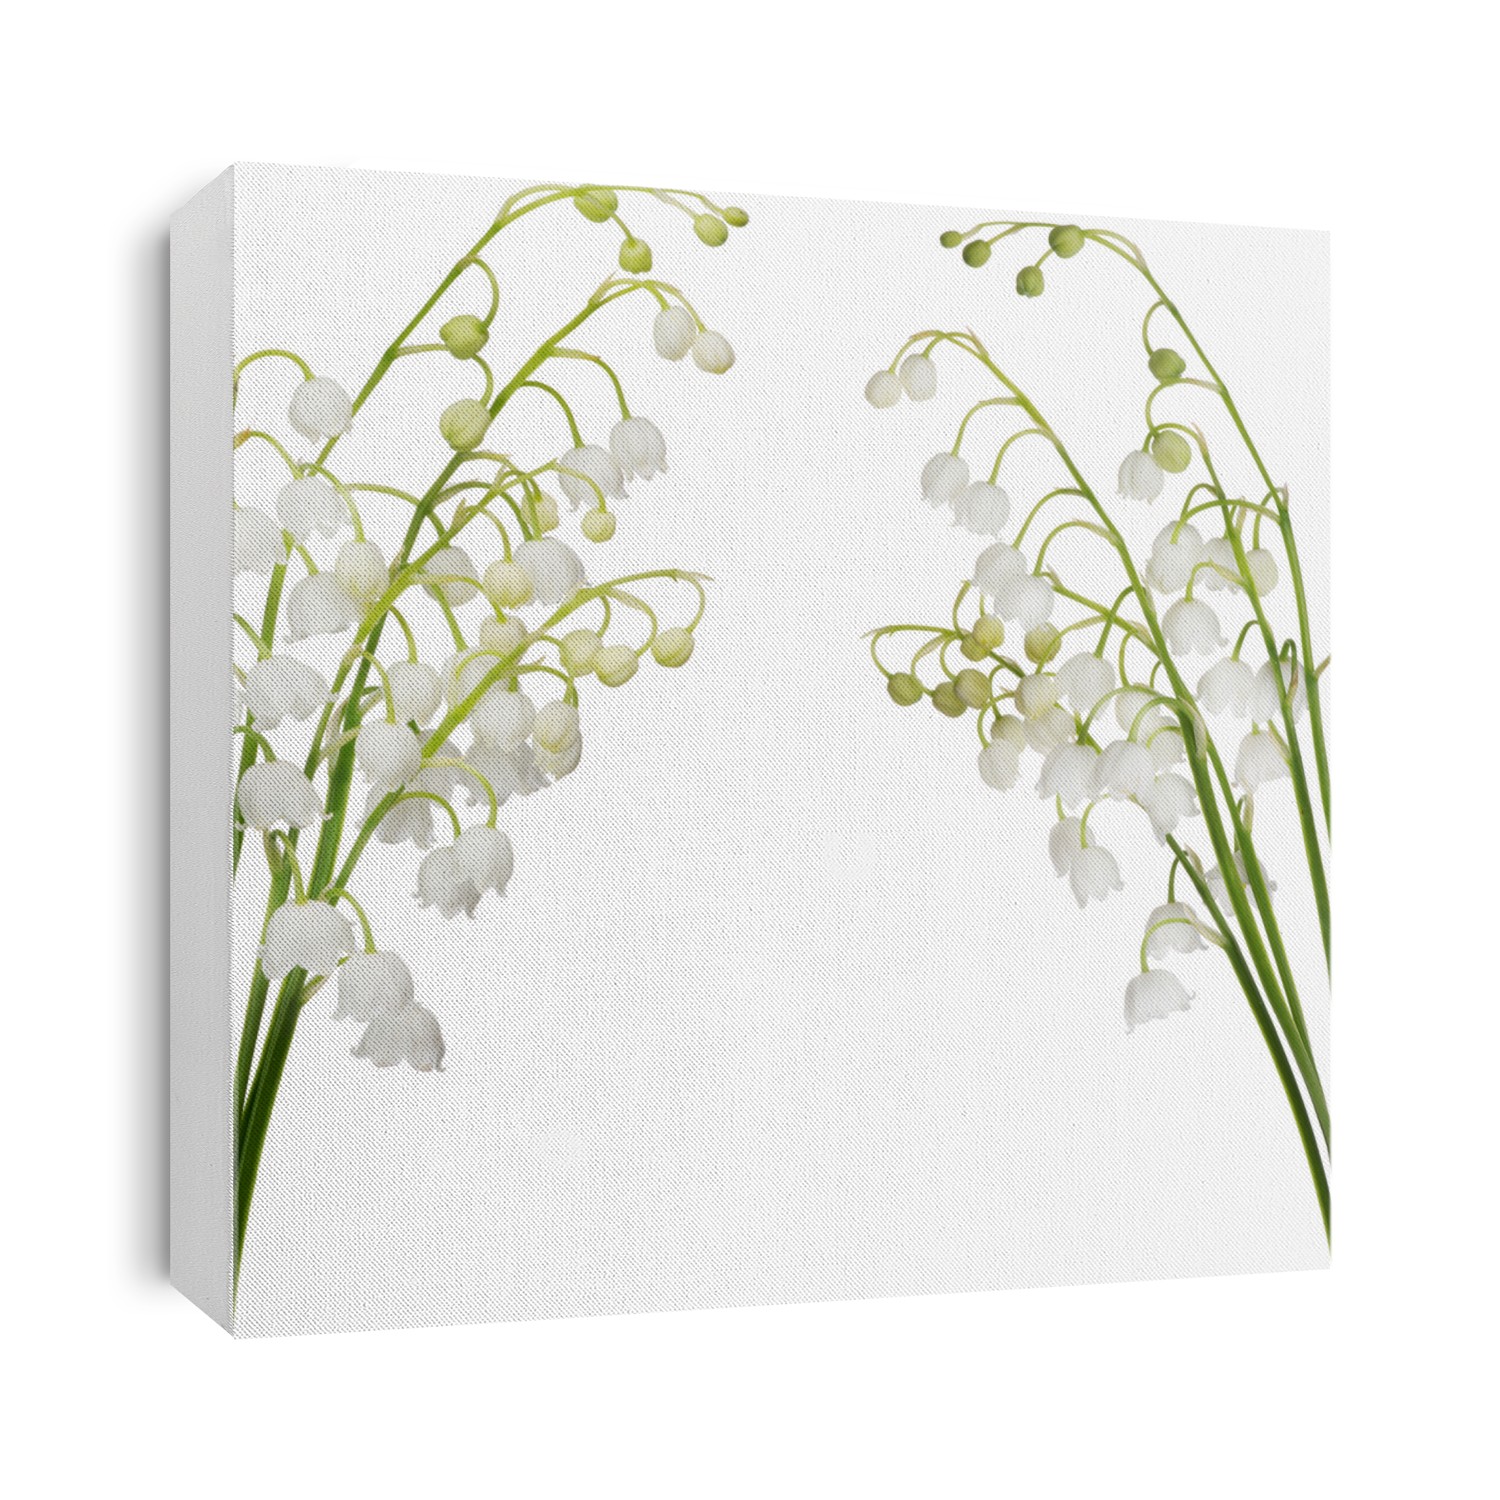 lily-of-the-valley flowers isolated on white background